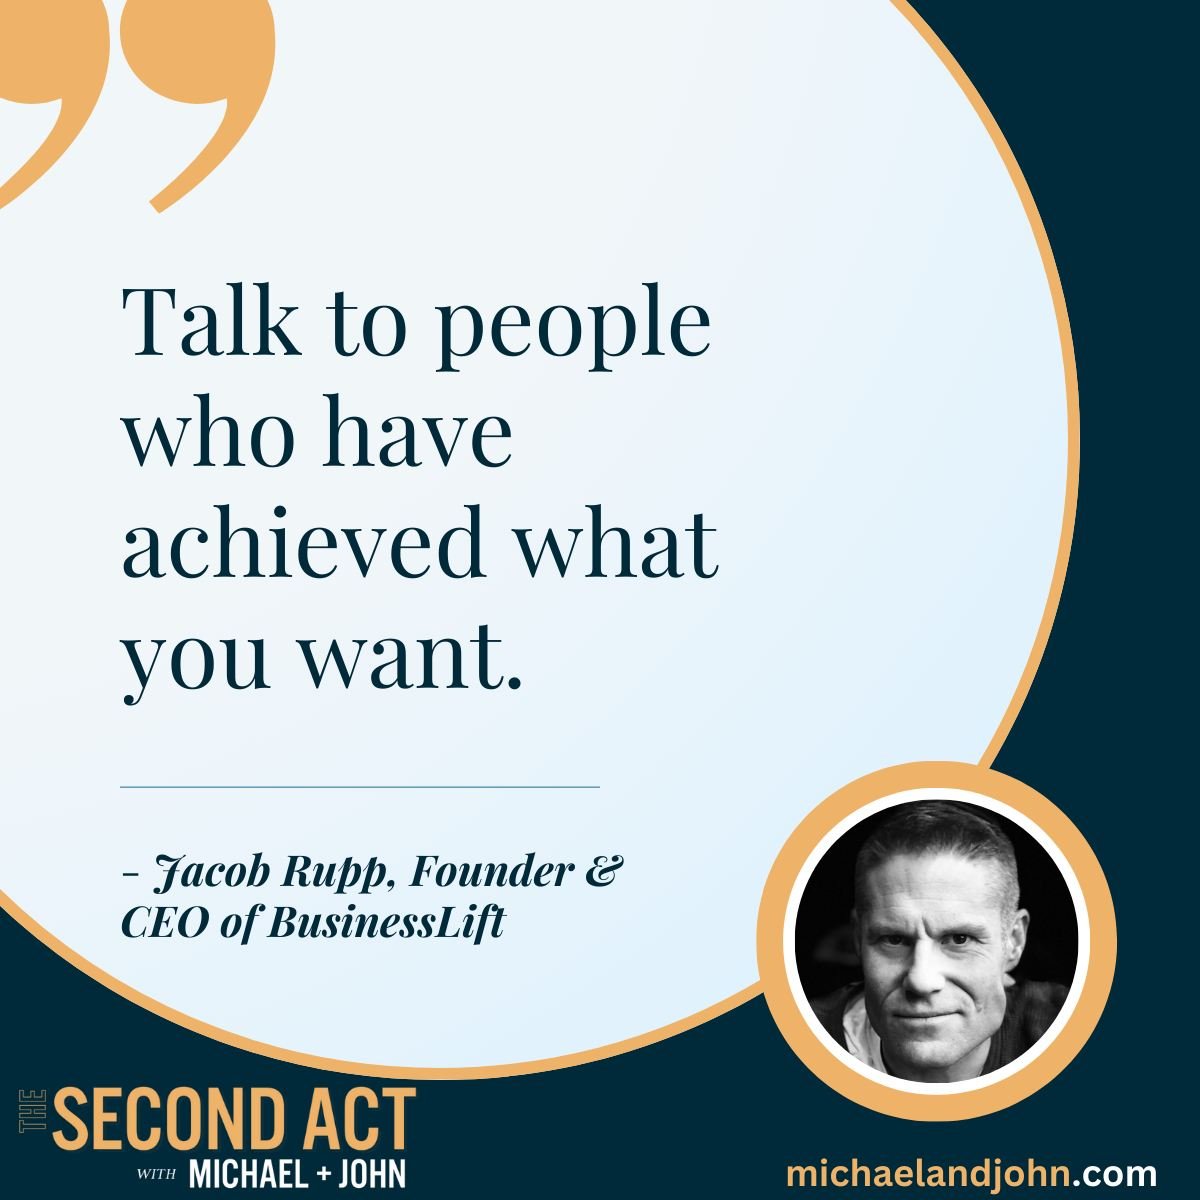 Unlock the path to success by engaging with those who've already reached the summit 🚀 #JacobRupp reminds us: 'Talk to people who have achieved what you want.' Connect, learn, and grow! #BusinessLift #SuccessTips #BusinessCoaching #Networking